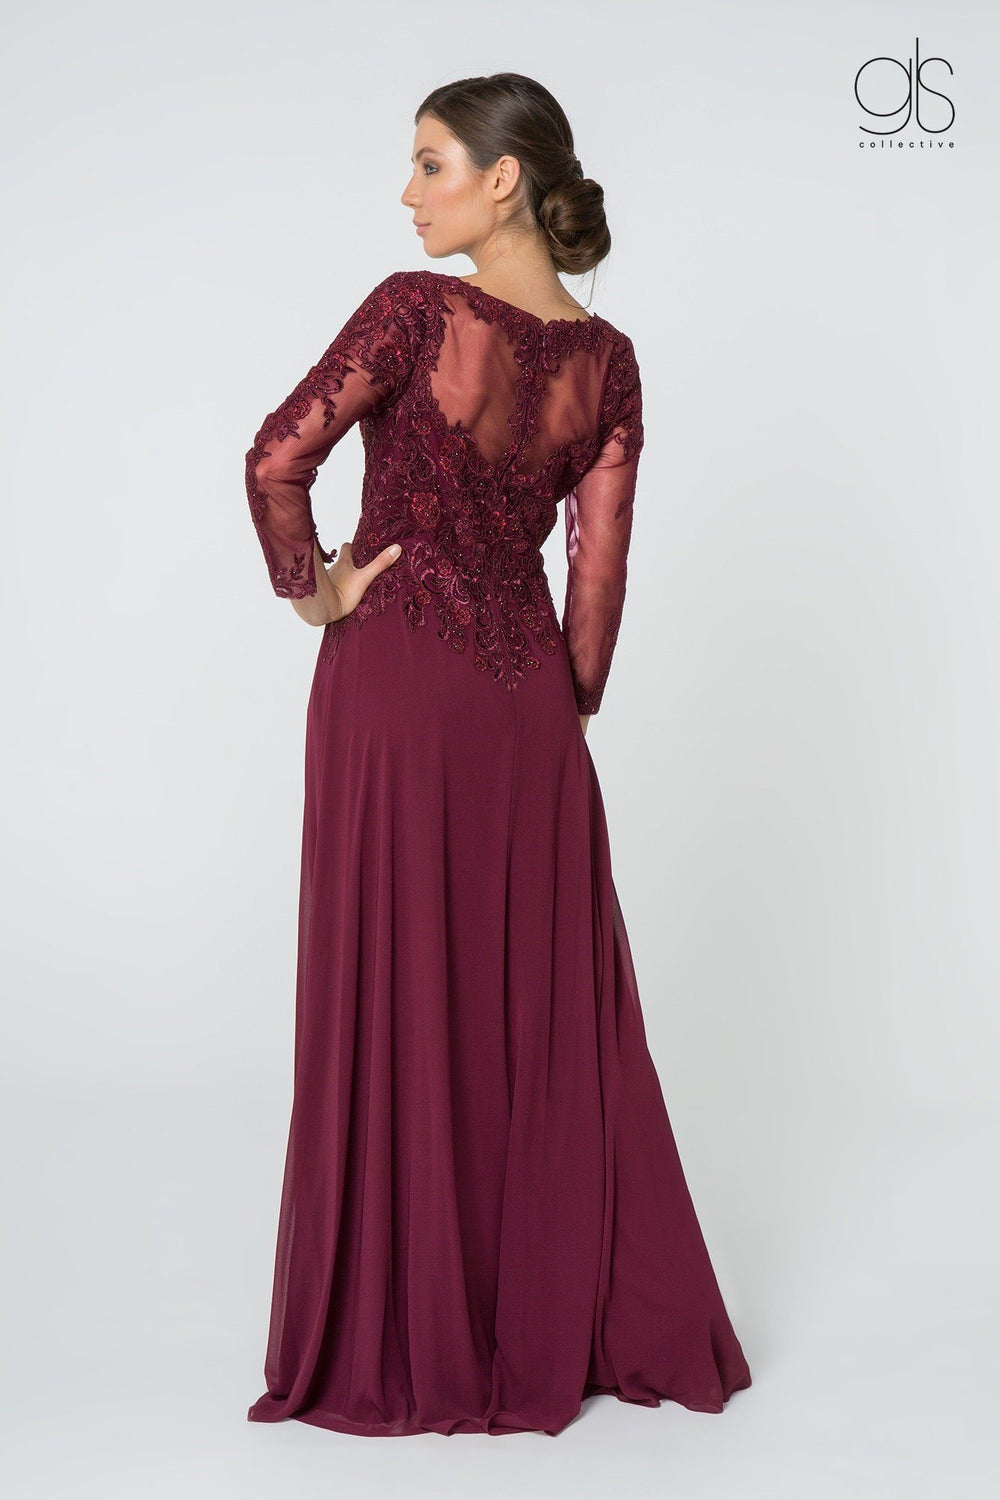 Floral Lace Long V-Neck Dress with Sleeves by Elizabeth K GL2825-Long Formal Dresses-ABC Fashion